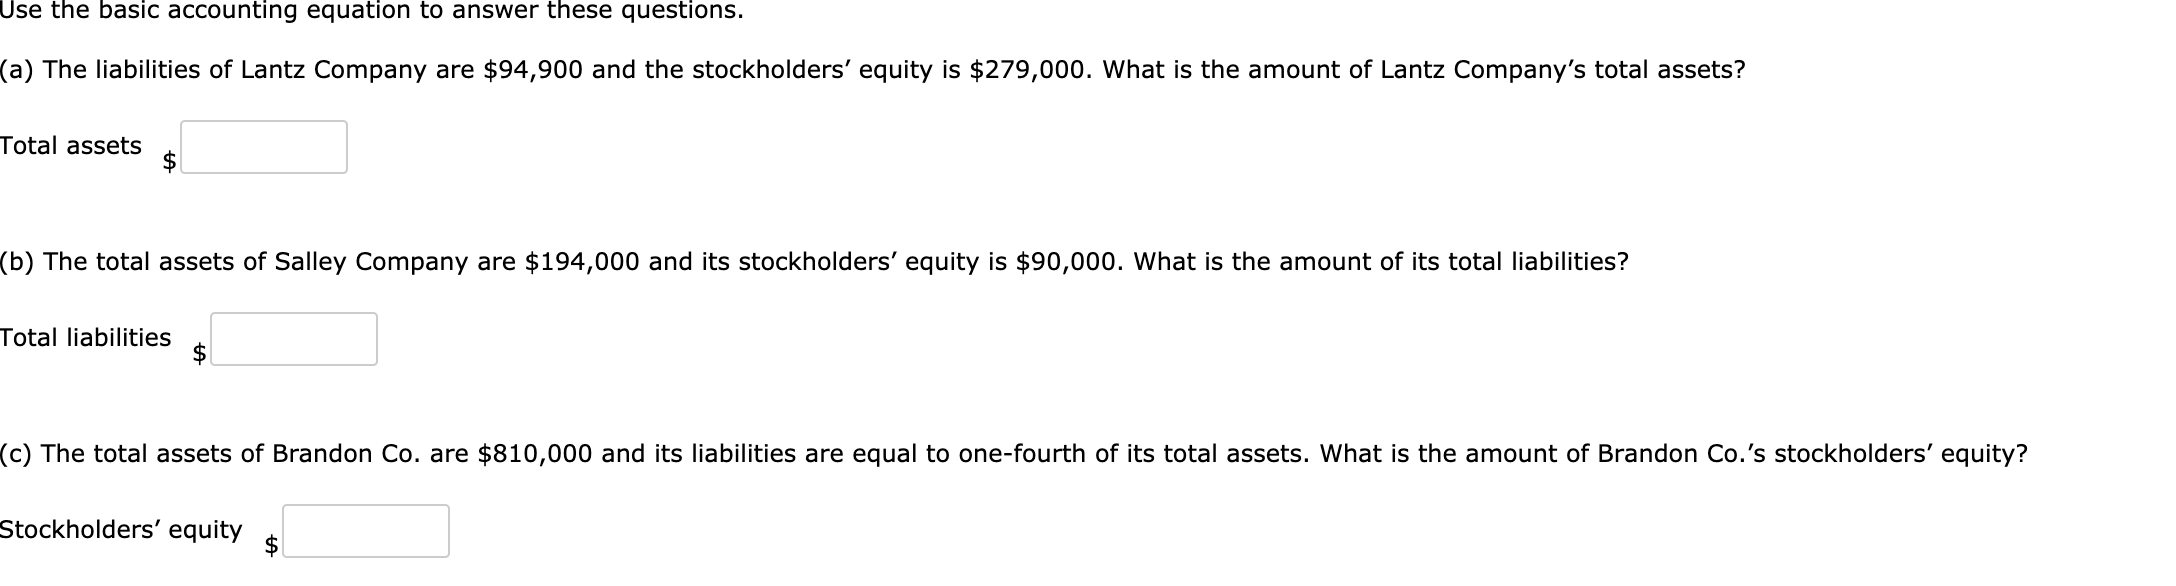 Use the basic accounting equation to answer these questions.
(a) The liabilities of Lantz Company are $94,900 and the stockholders' equity is $279,000. What is the amount of Lantz Company's total assets?
Total assets
(b) The total assets of Salley Company are $194,000 and its stockholders' equity is $90,000. What is the amount of its total liabilities?
Total liabilities
(c) The total assets of Brandon Co. are $81
000 and its liabilities are equal to one-fourth of its total assets. What is the amount of Brandon Co.'s stockholders' equity?
Stockholders' equity
$
